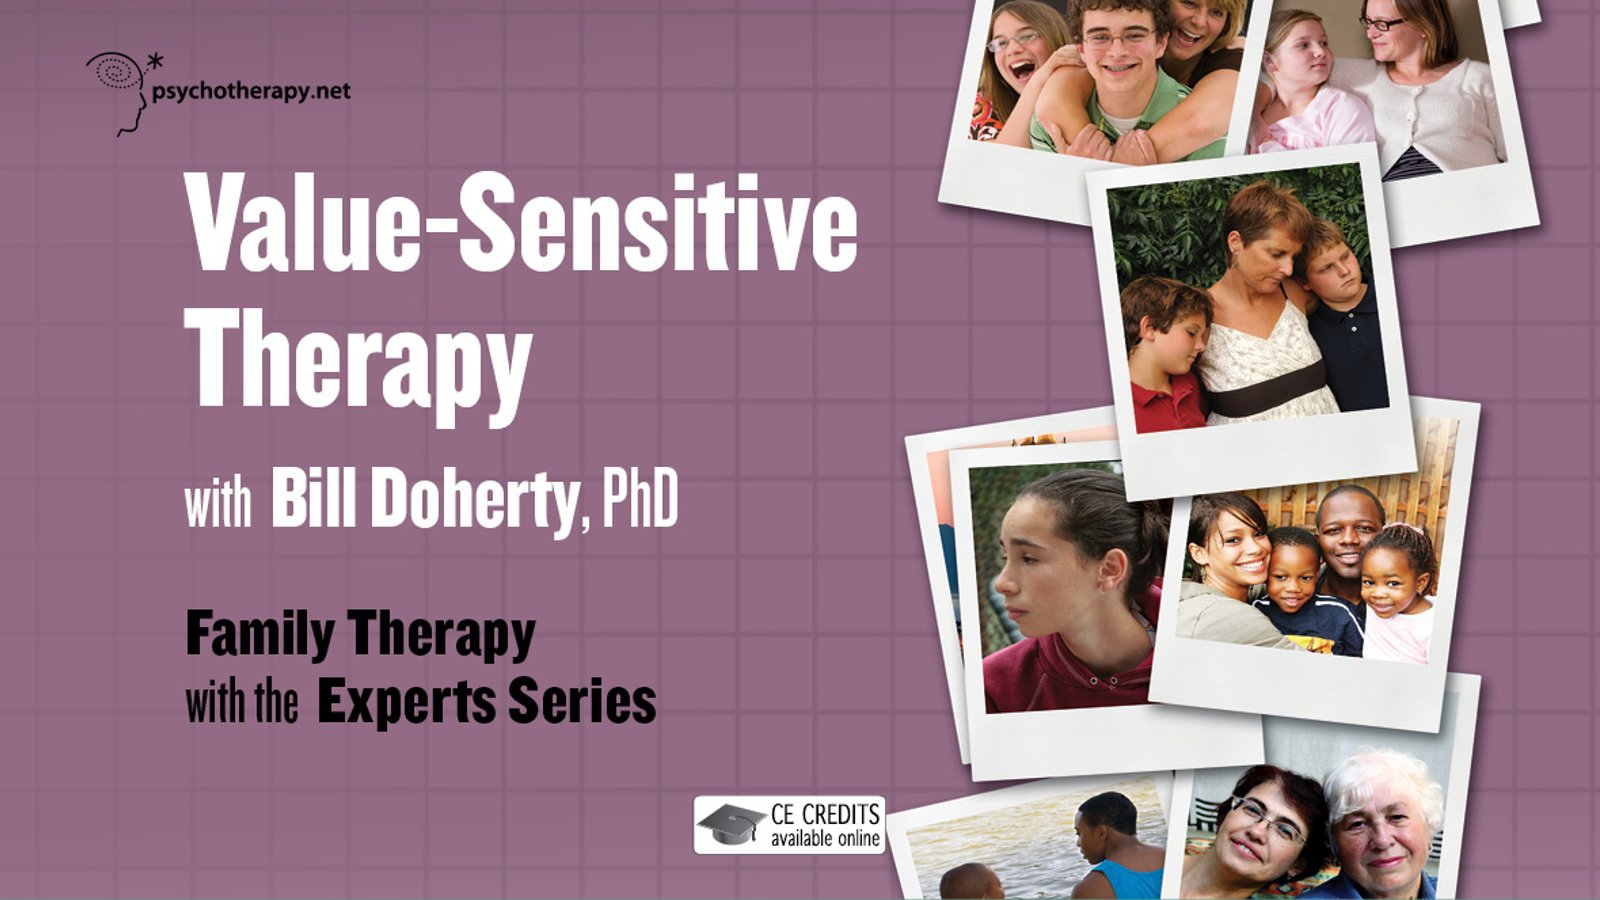 Value-Sensitive Therapy - With William Doherty